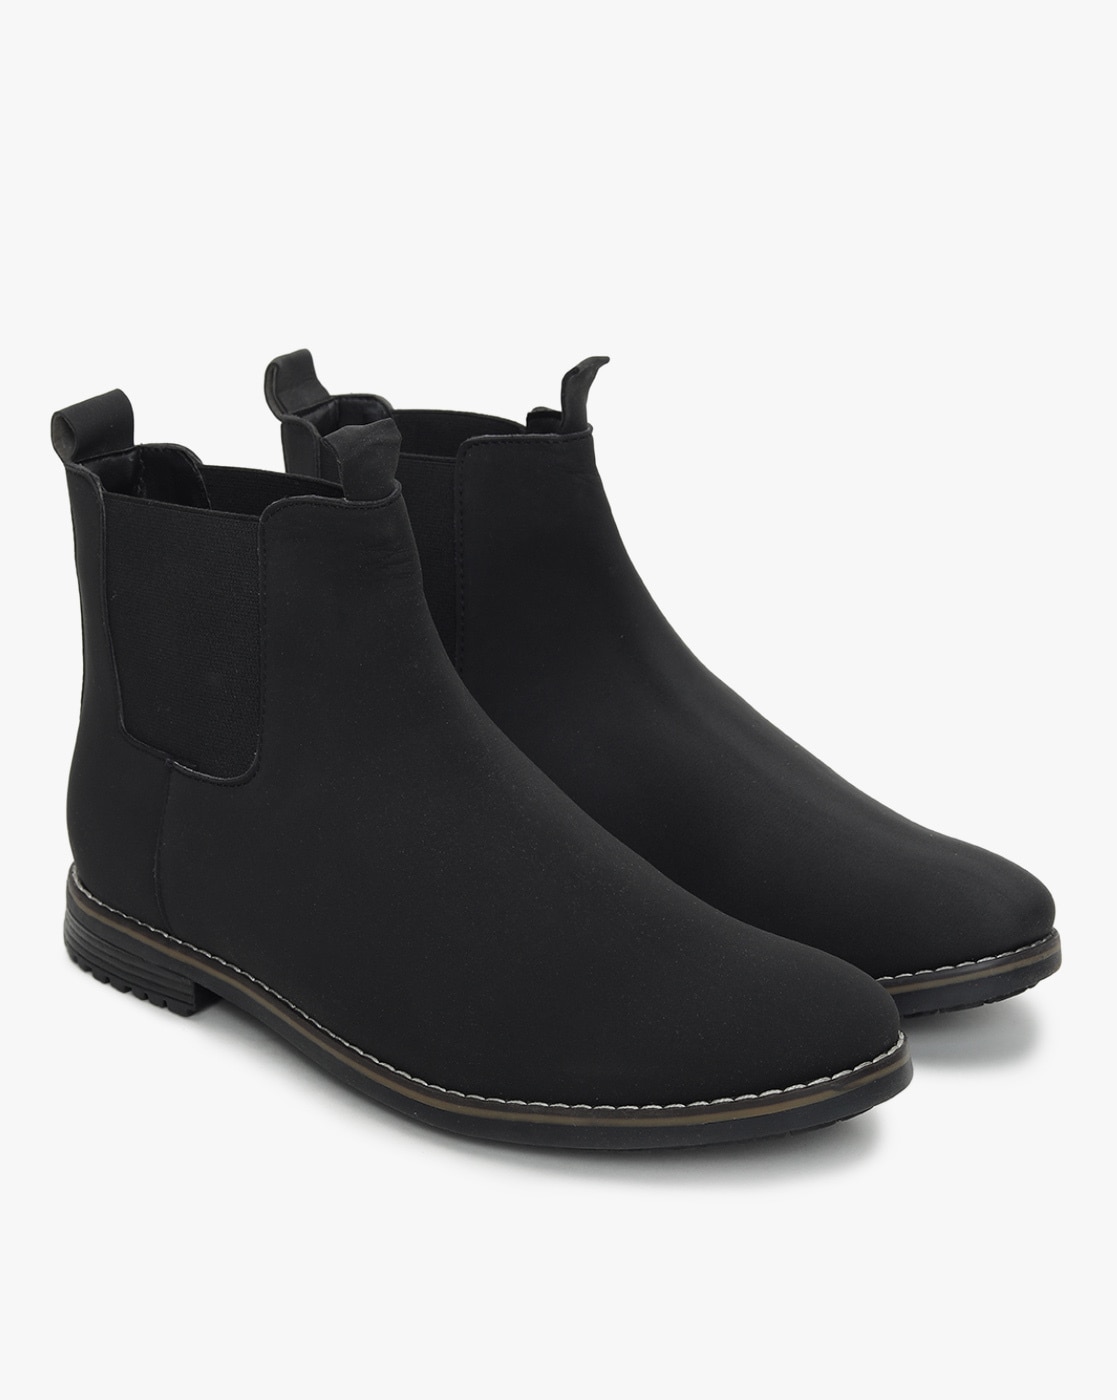 Buy Black Boots for by EL PASO Online |